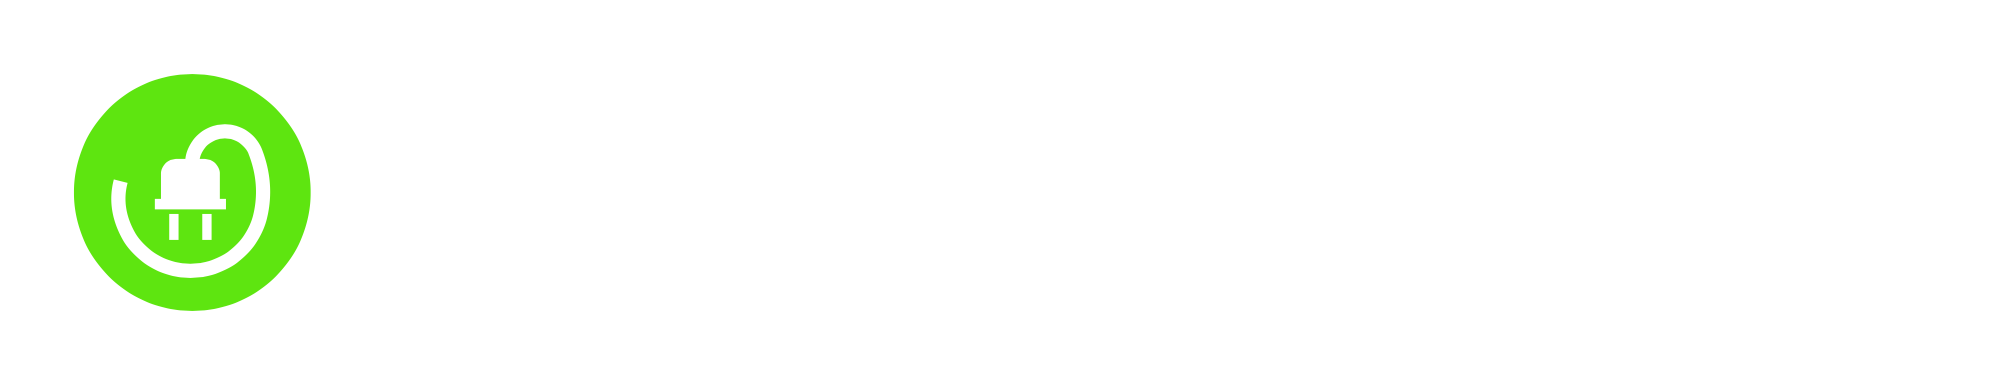 Eastwood Electrical Service